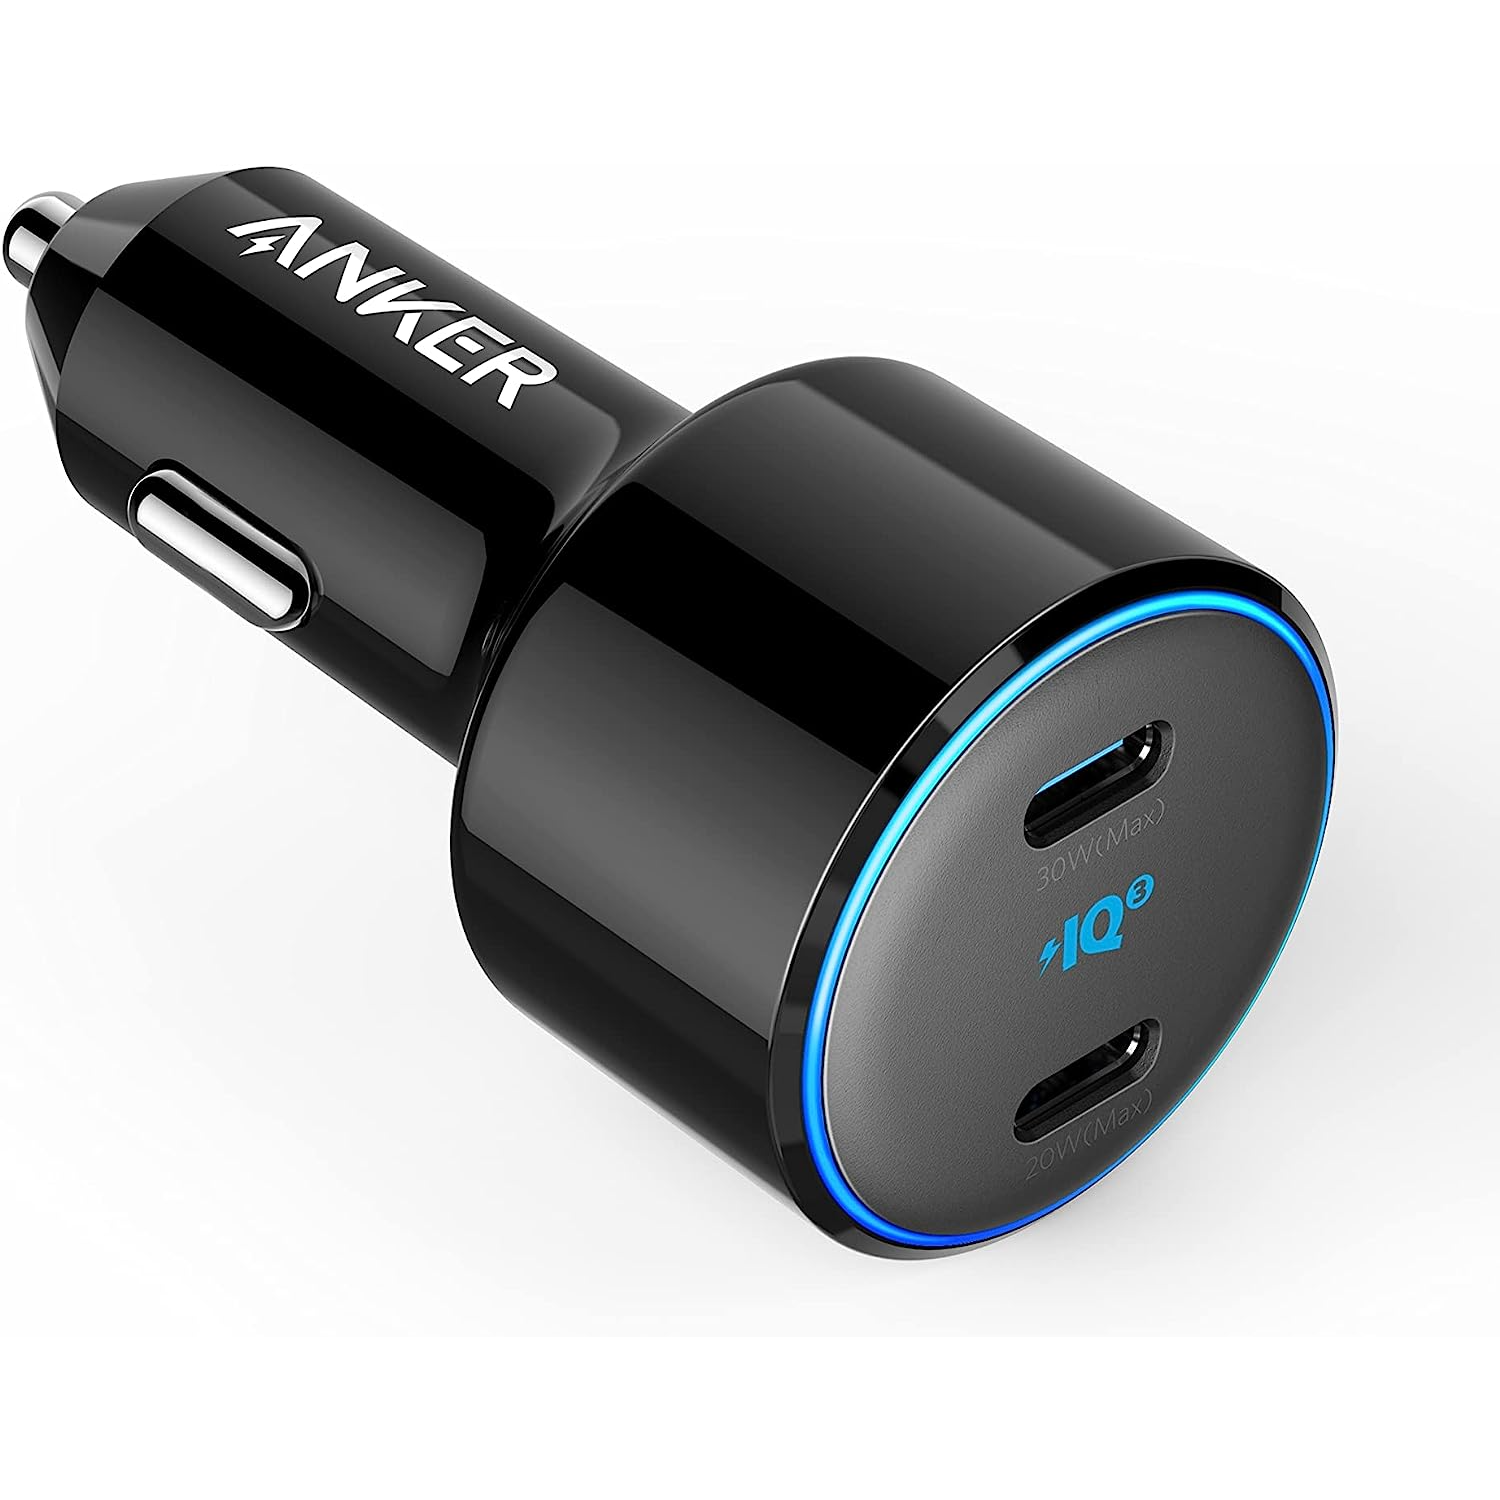 Anker PowerDrive+ III Duo charger on a white background